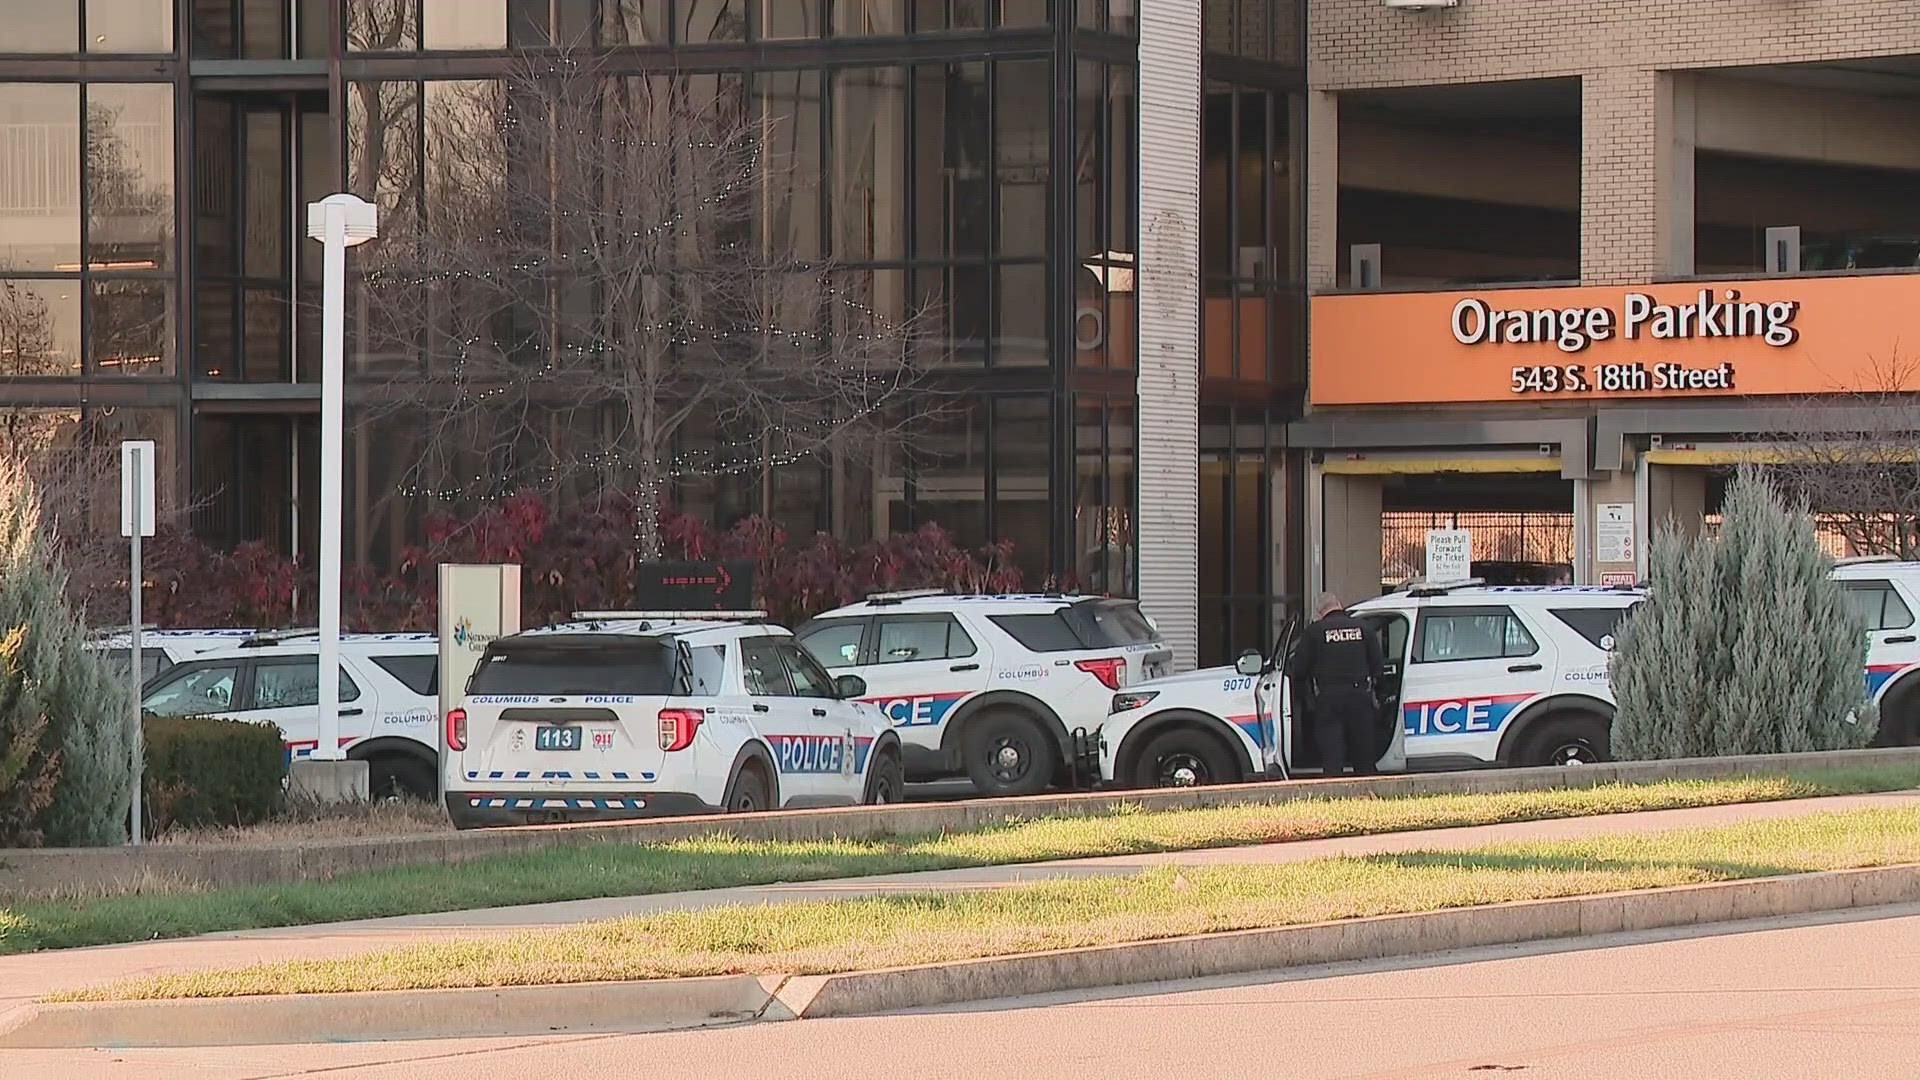 Nationwide Children’s Hospital was placed on lockdown for 40 minutes after reports were made of a man armed with an assault rifle Tuesday afternoon.